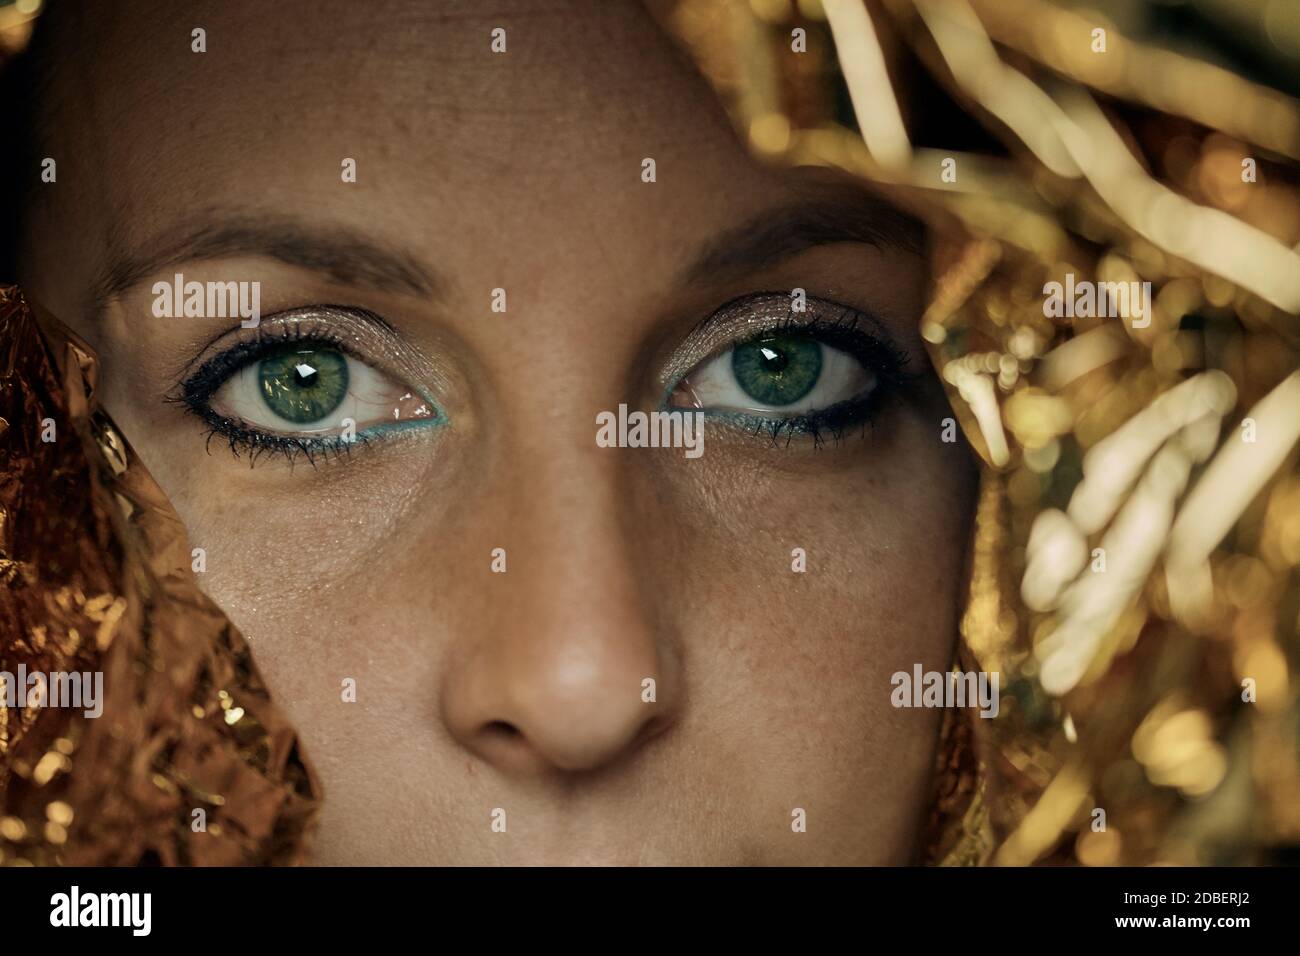 Close-up of expressive green eyes of a young woman face with make-up and gold foil. Stock Photo